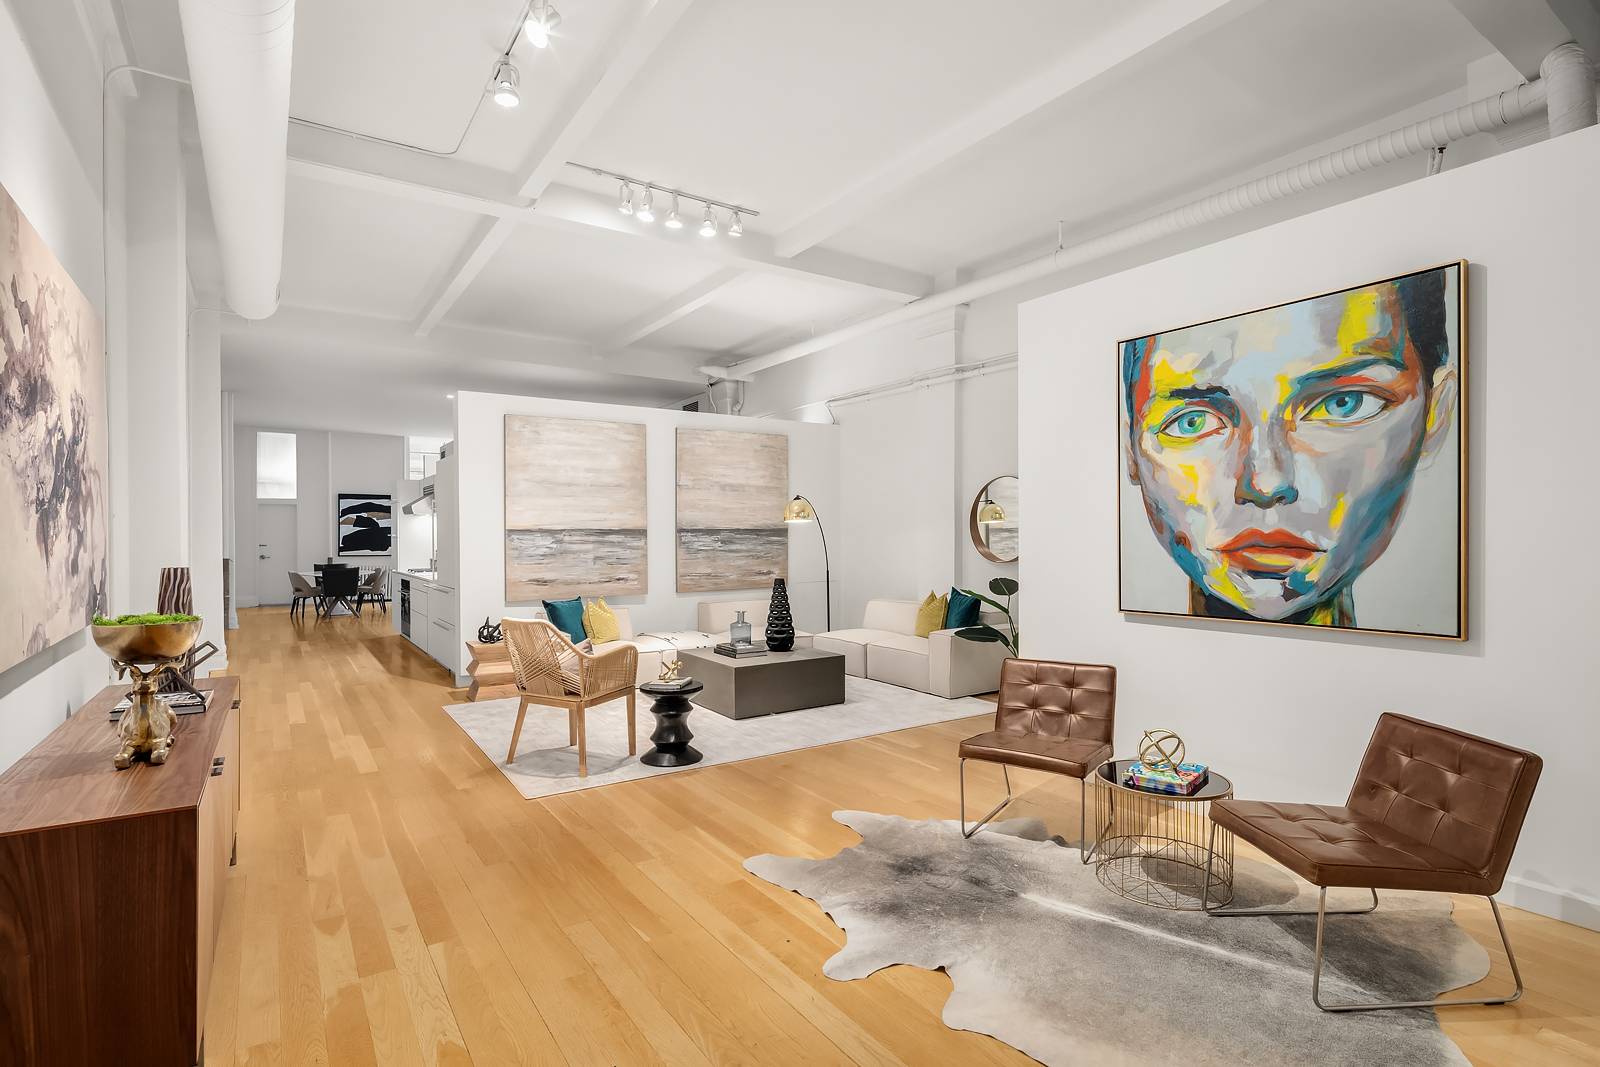 The quintessence of classic Chelsea charm, this gut renovated 2 bedroom, 2 bathroom co op offers residents a laidback lifestyle loft just two blocks from Madison Square Park.